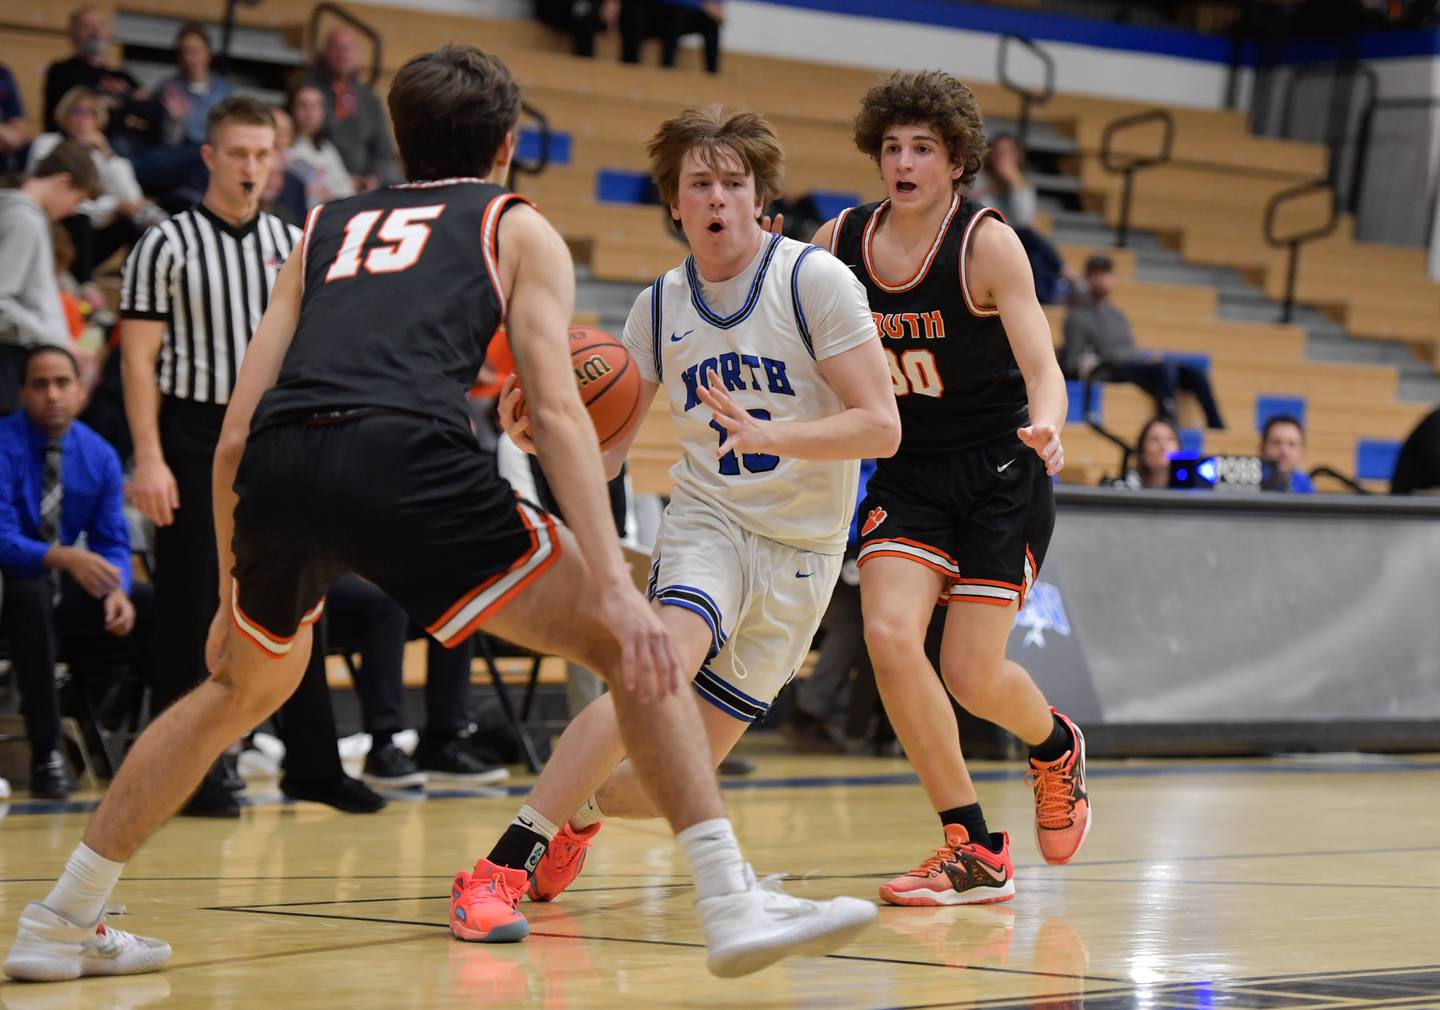 St. Charles North's Daniel Connolly (10) drives between Wheaton Warrenville South Nick Brooks (15) and Luca Carbonaro (30) during a game on Friday, December 2, 2022.